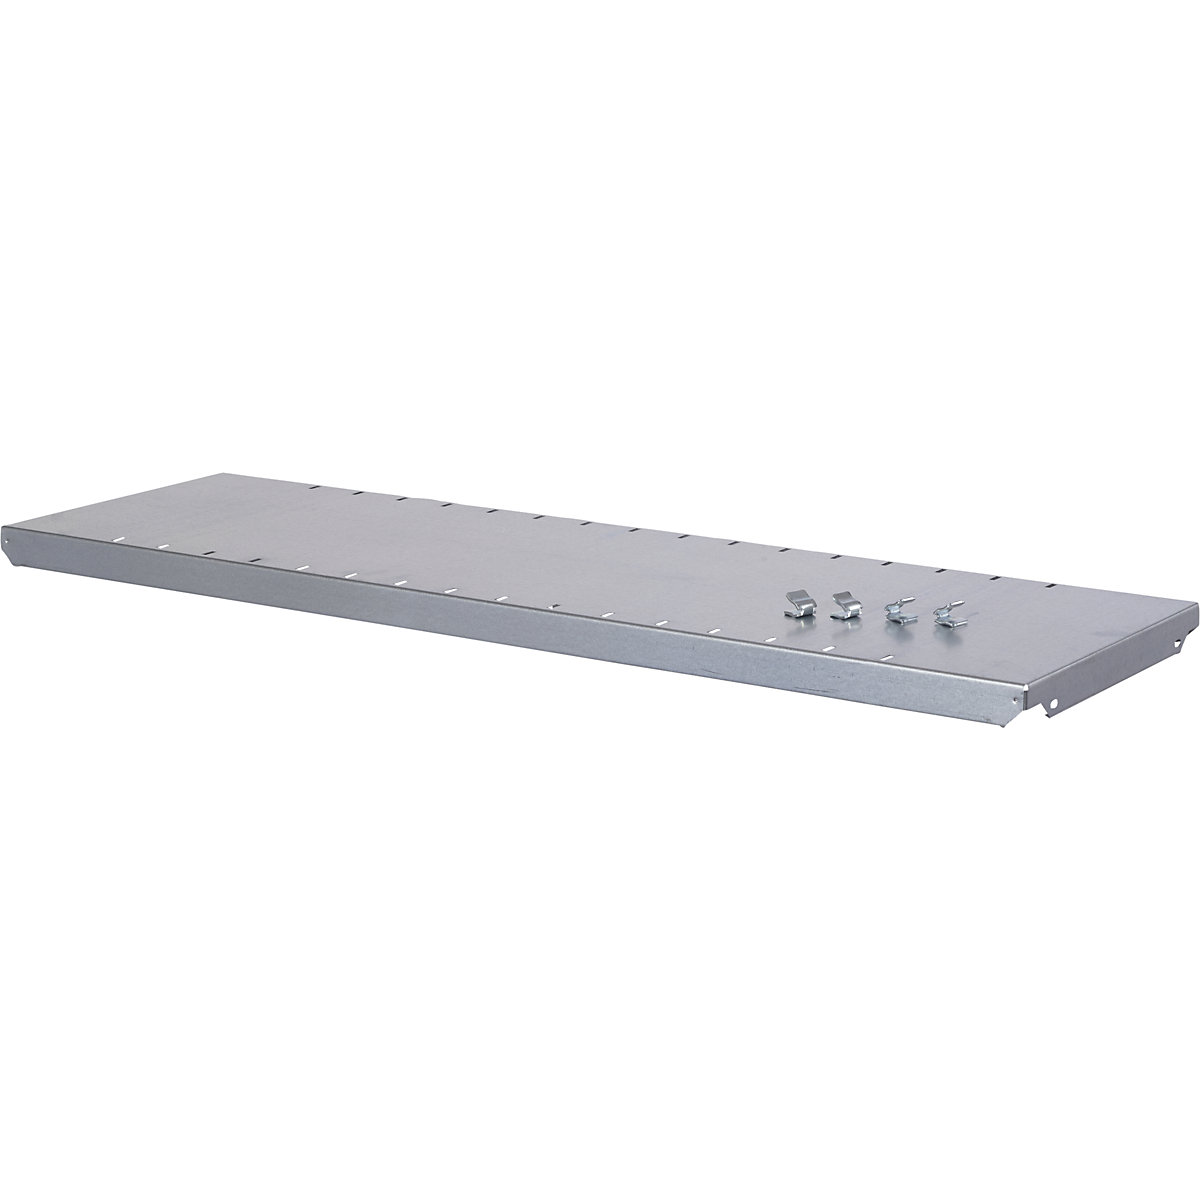 Shelf for shelving with coloured containers – STEMO, zinc-plated, width x depth 1000x300 mm